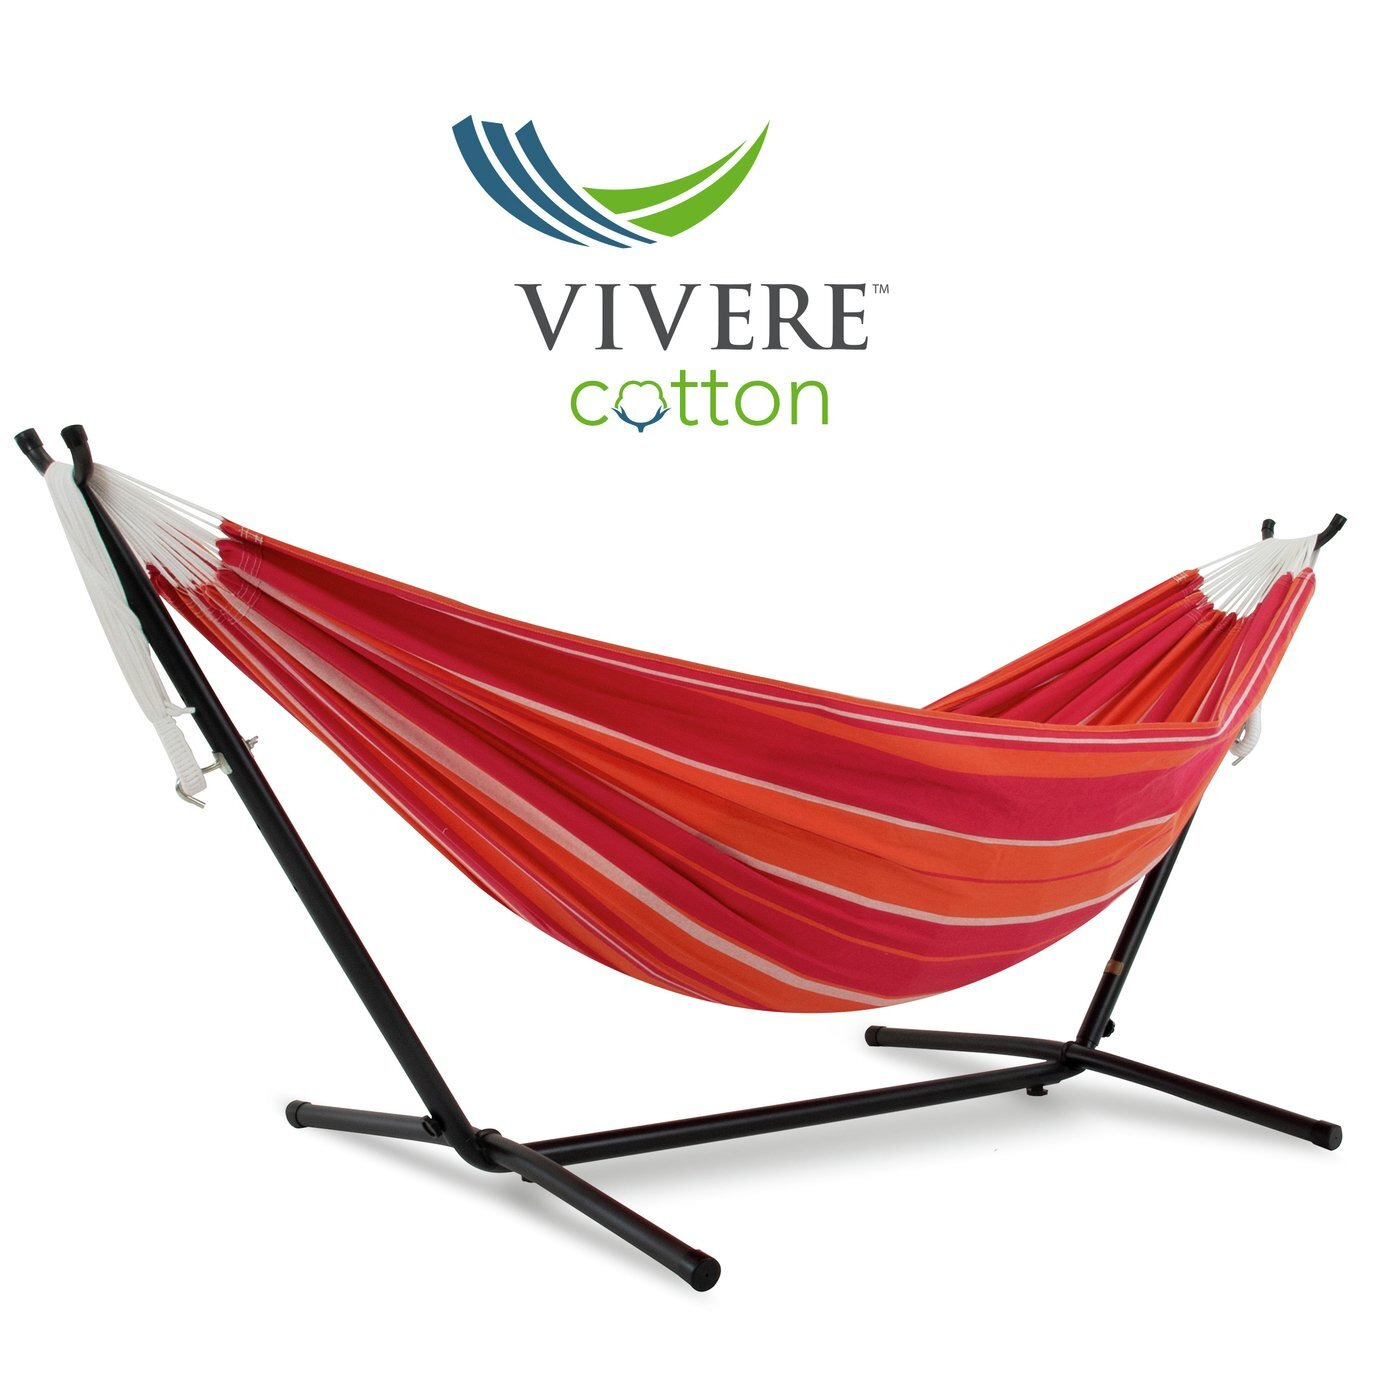 Vivere Mimosa Hammock with Metal Stand - image 1